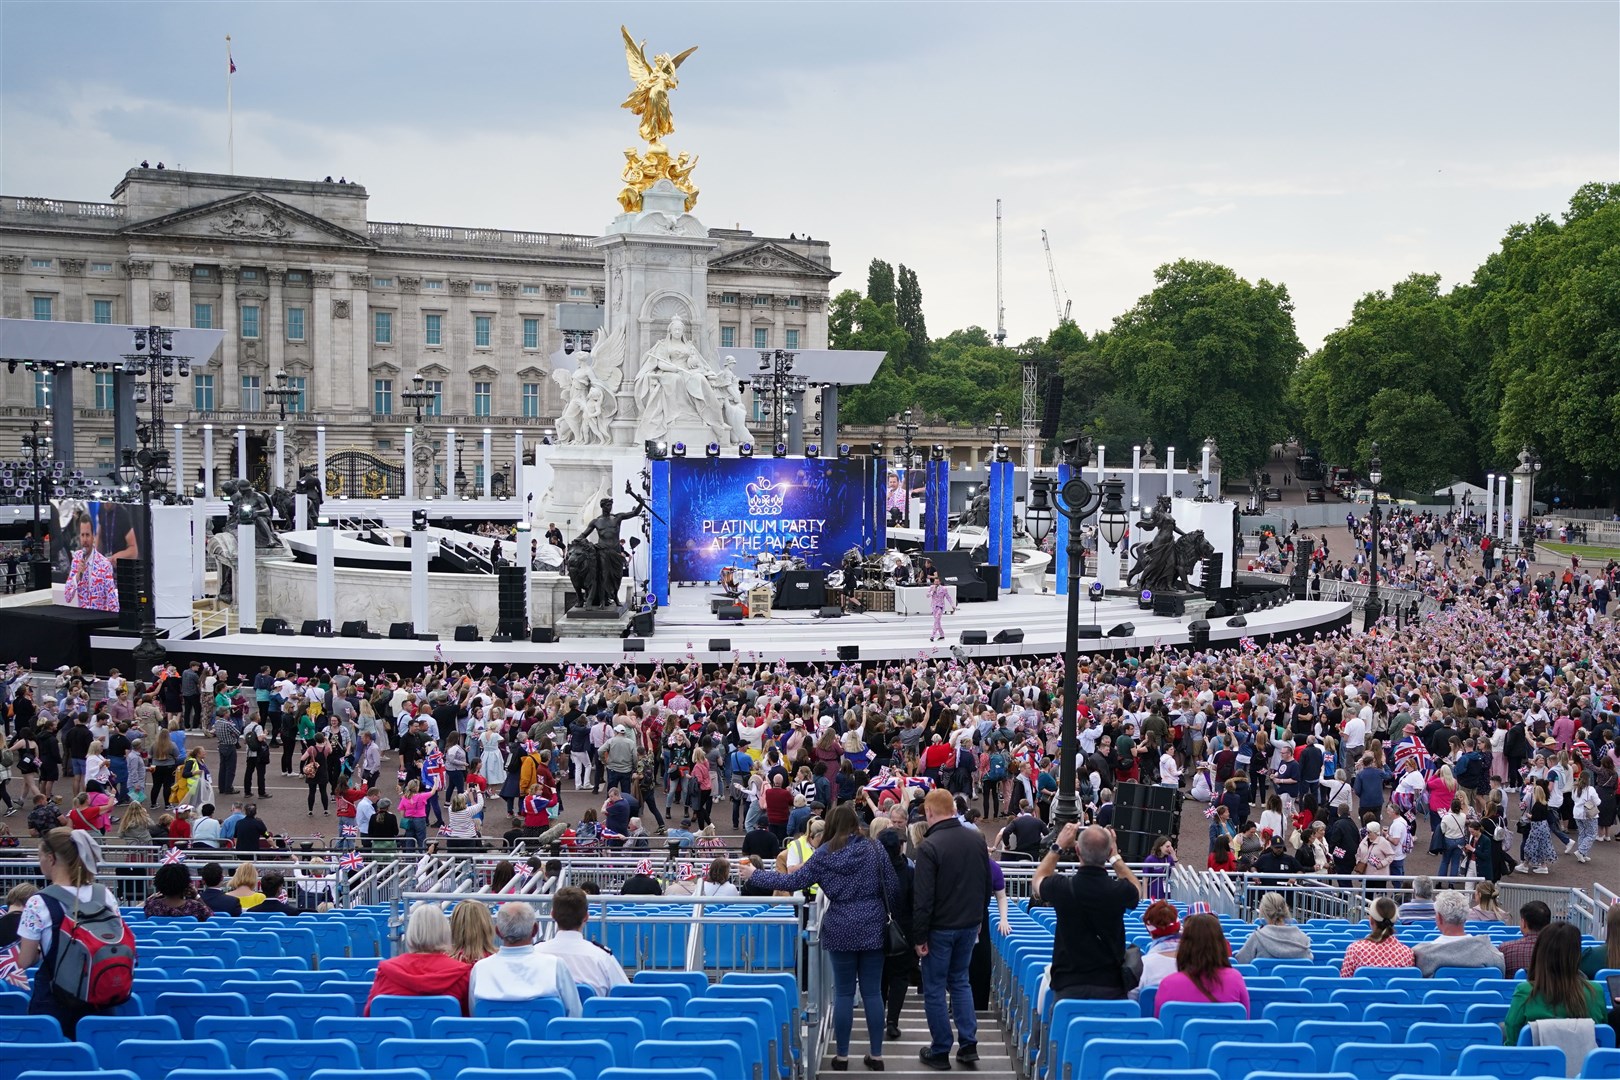 The crowd arriving before the start of the Platinum Party at the Palace in front of Buckingham Palace (Jacob King/PA)